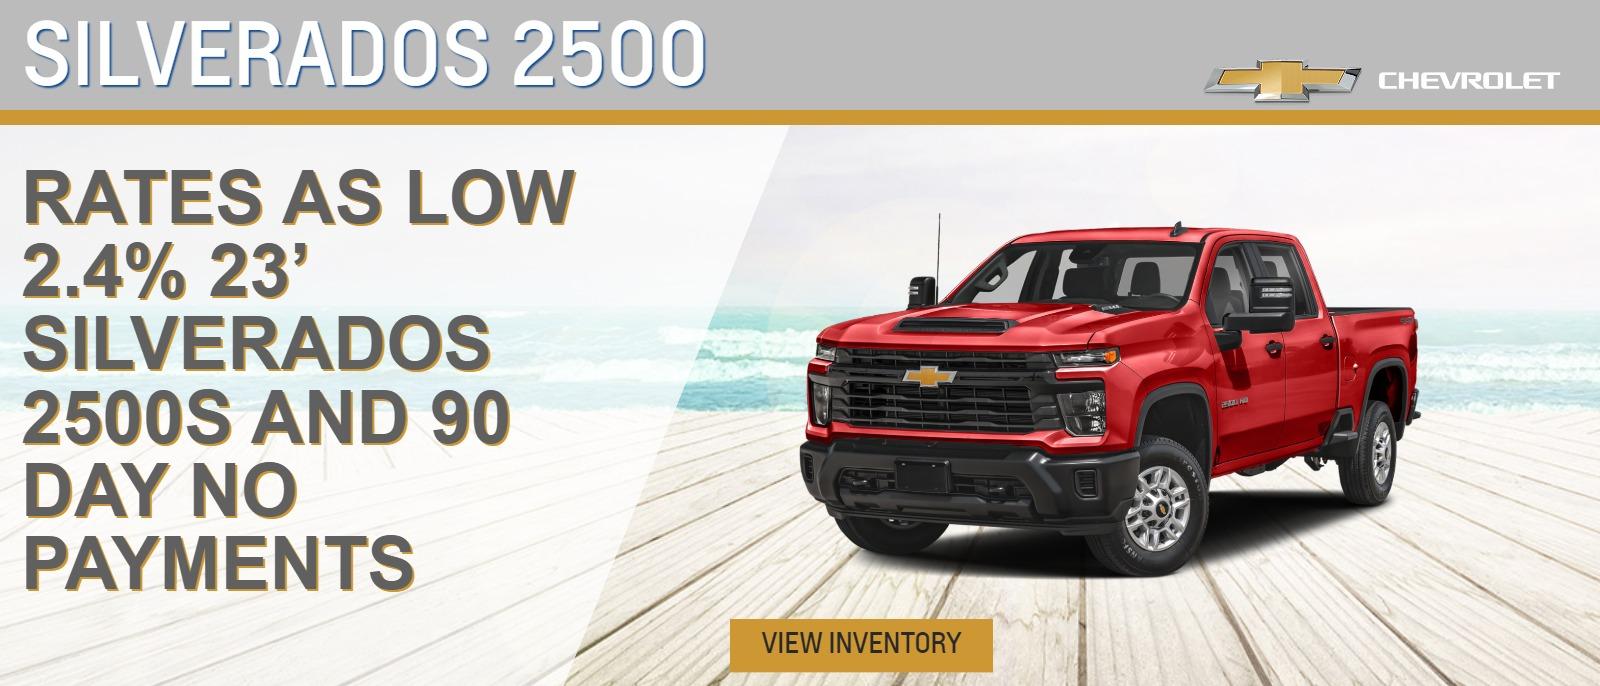 Shop Accessories for Chevrolet Vehicles